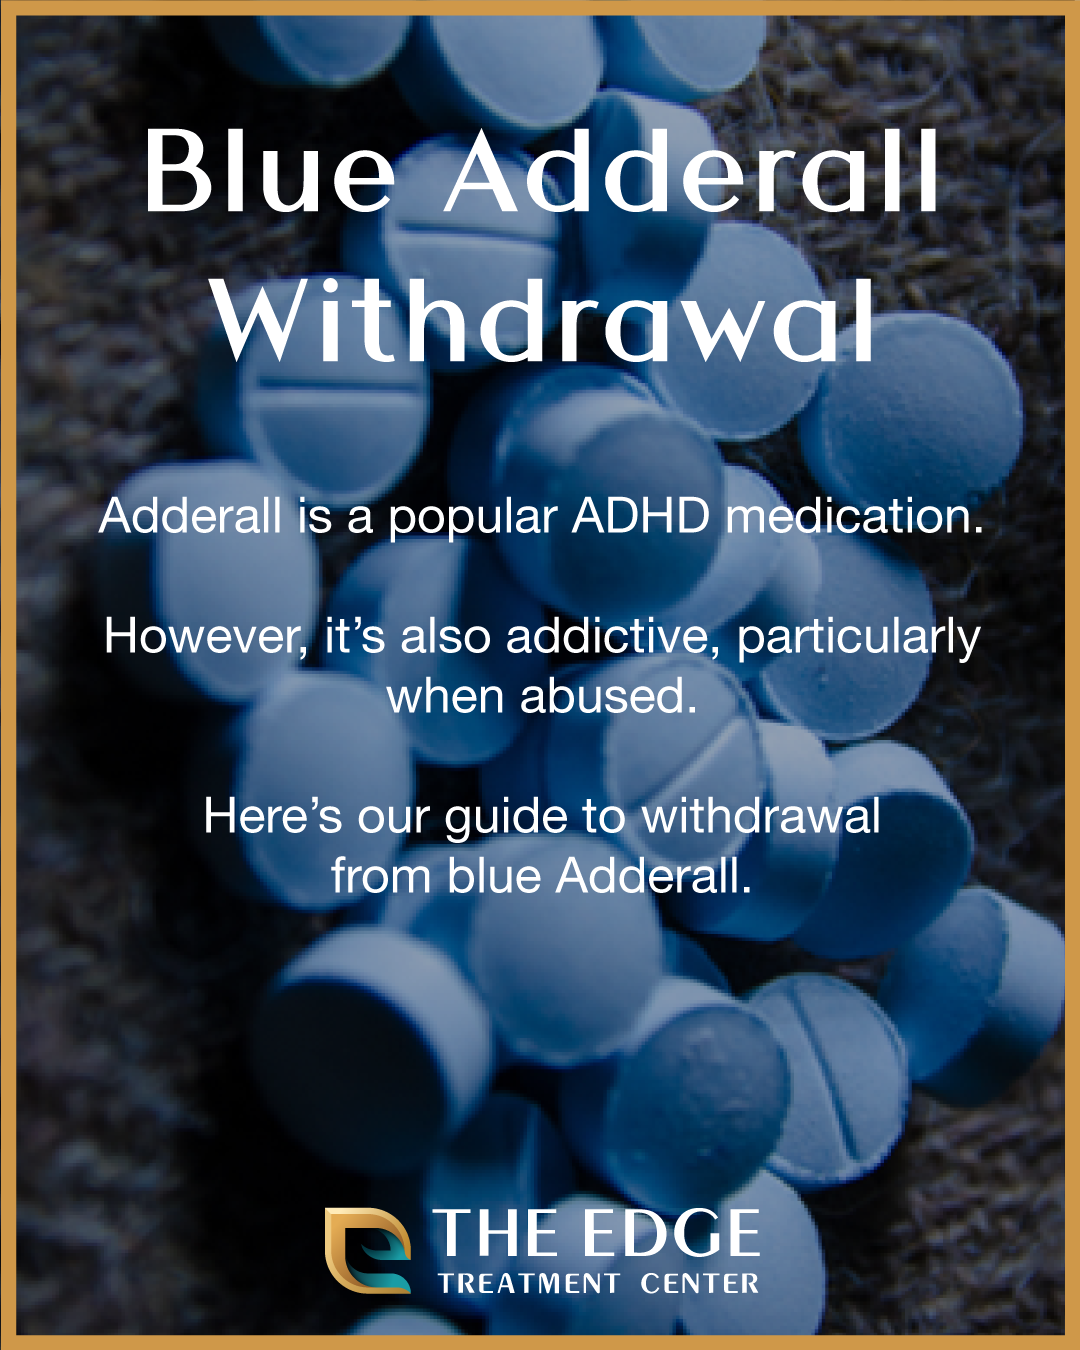 Modafinil Vs Adderall: How To Choose?